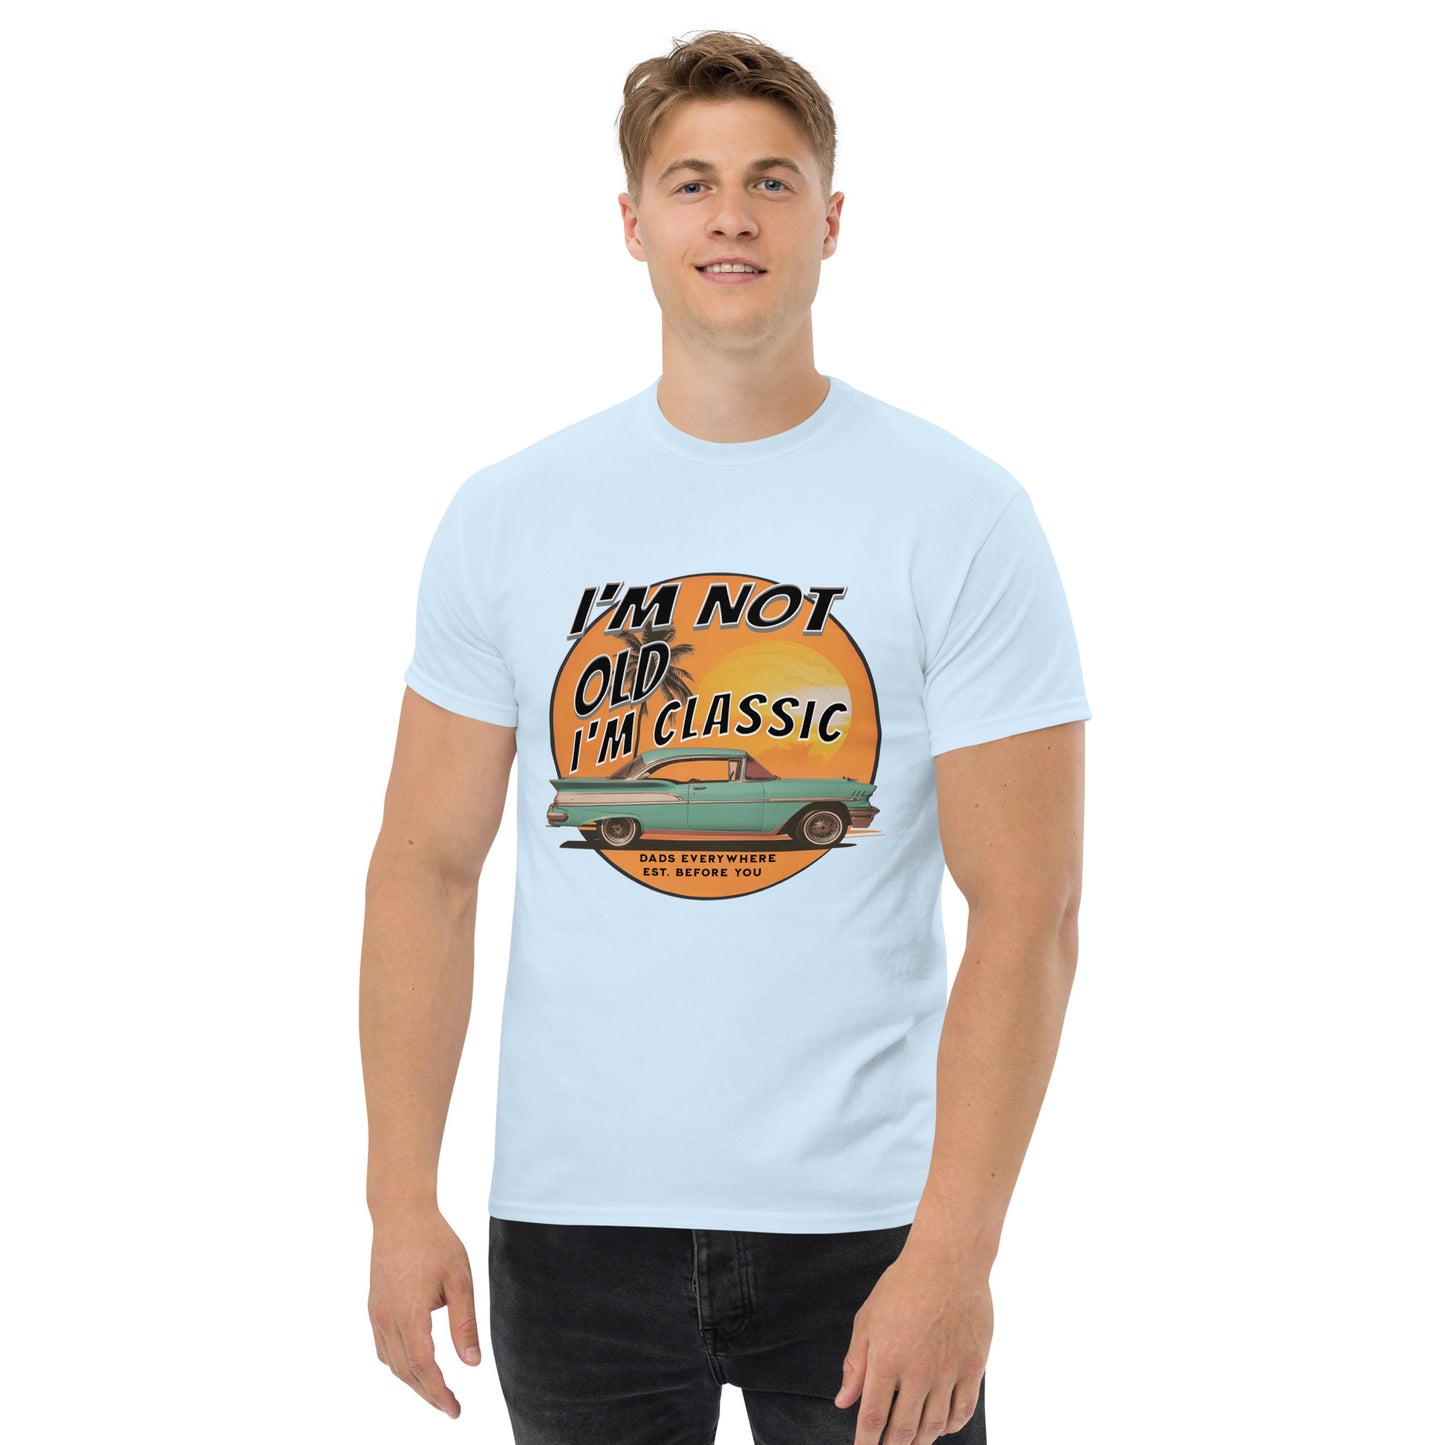 Classic Dad Humor Tee - 'I'm Not Old, I'm Classic'